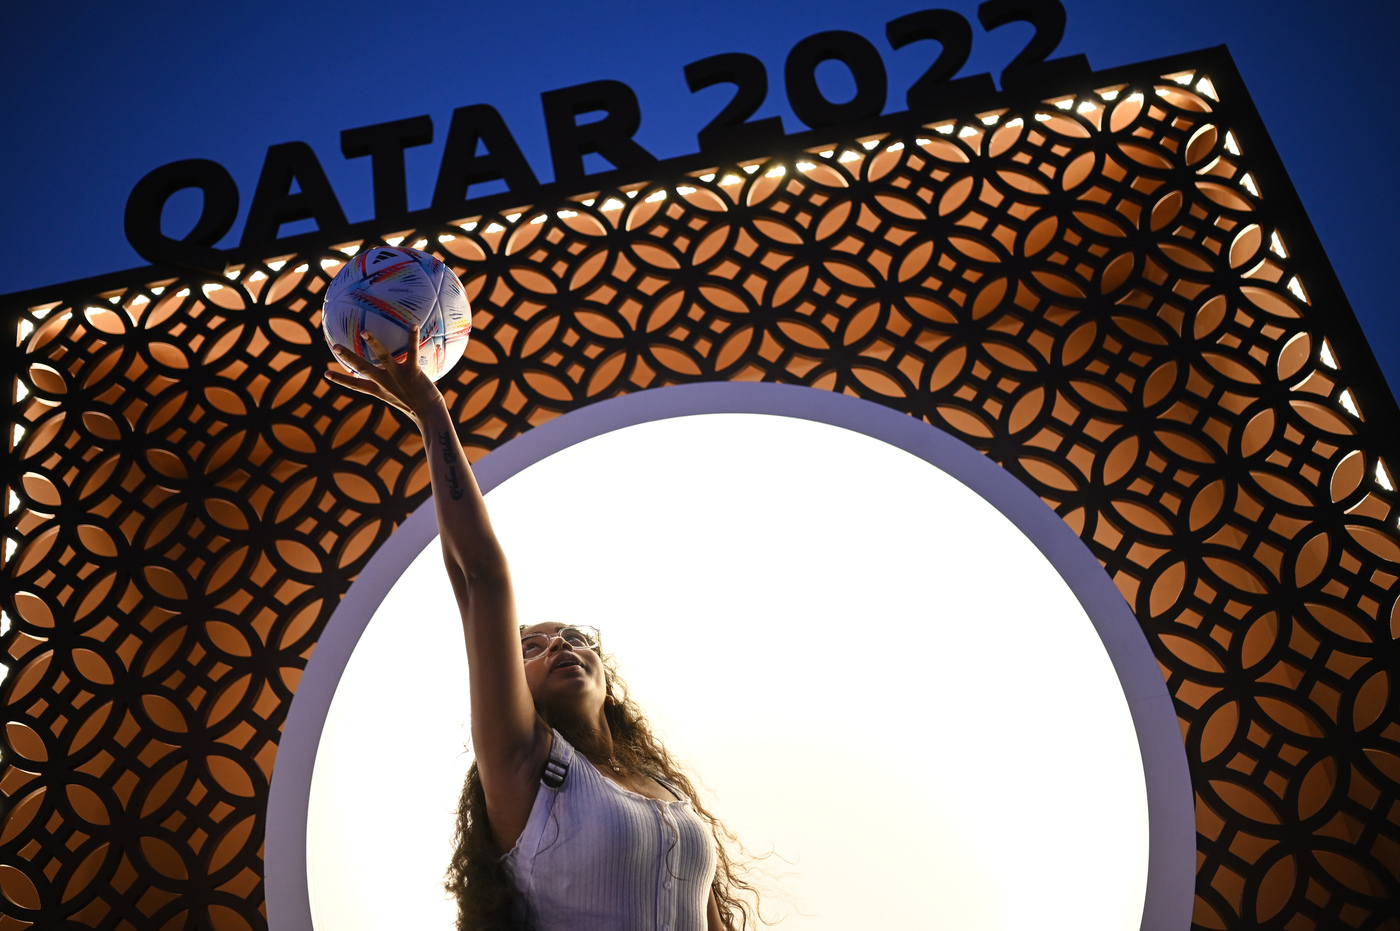 Qatar will look to kick off the FIFA World Cup 2022 with a bang when they welcome Ecuador to the Al Bayt Stadium.